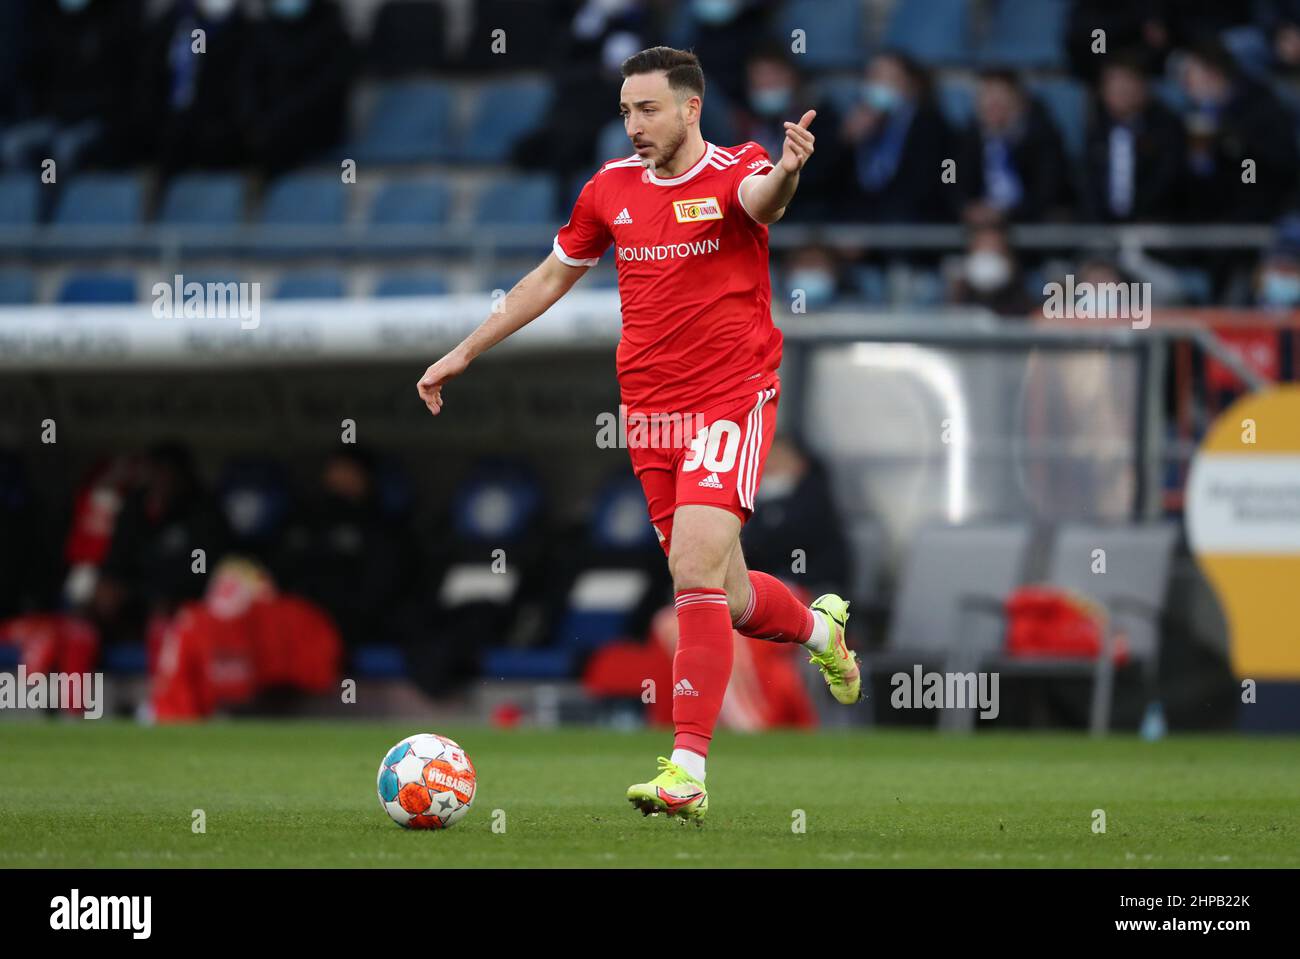 Bielefeld, Germany. 19th Feb, 2022. Soccer: Bundesliga, Arminia Bielefeld - 1. FC Union Berlin, match day 23 at Schüco Arena. Berlin's Kevin Möhwald heads the ball. Credit: Friso Gentsch/dpa - IMPORTANT NOTE: In accordance with the requirements of the DFL Deutsche Fußball Liga and the DFB Deutscher Fußball-Bund, it is prohibited to use or have used photographs taken in the stadium and/or of the match in the form of sequence pictures and/or video-like photo series./dpa/Alamy Live News Stock Photo